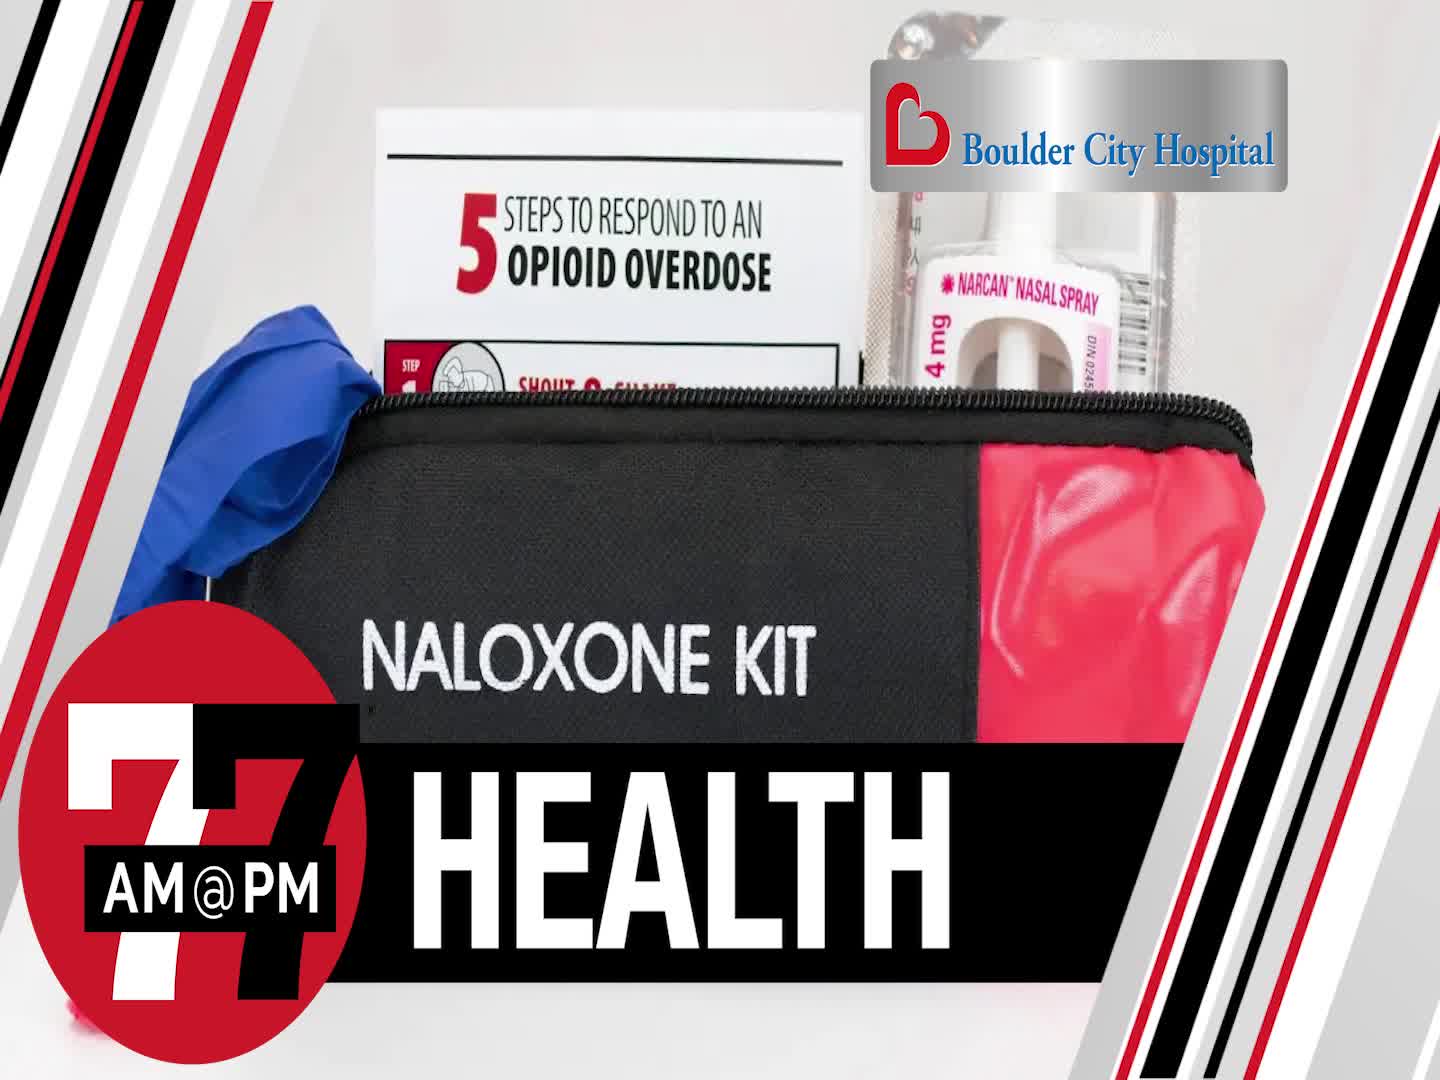 Over-the-counter Narcan and how to use it